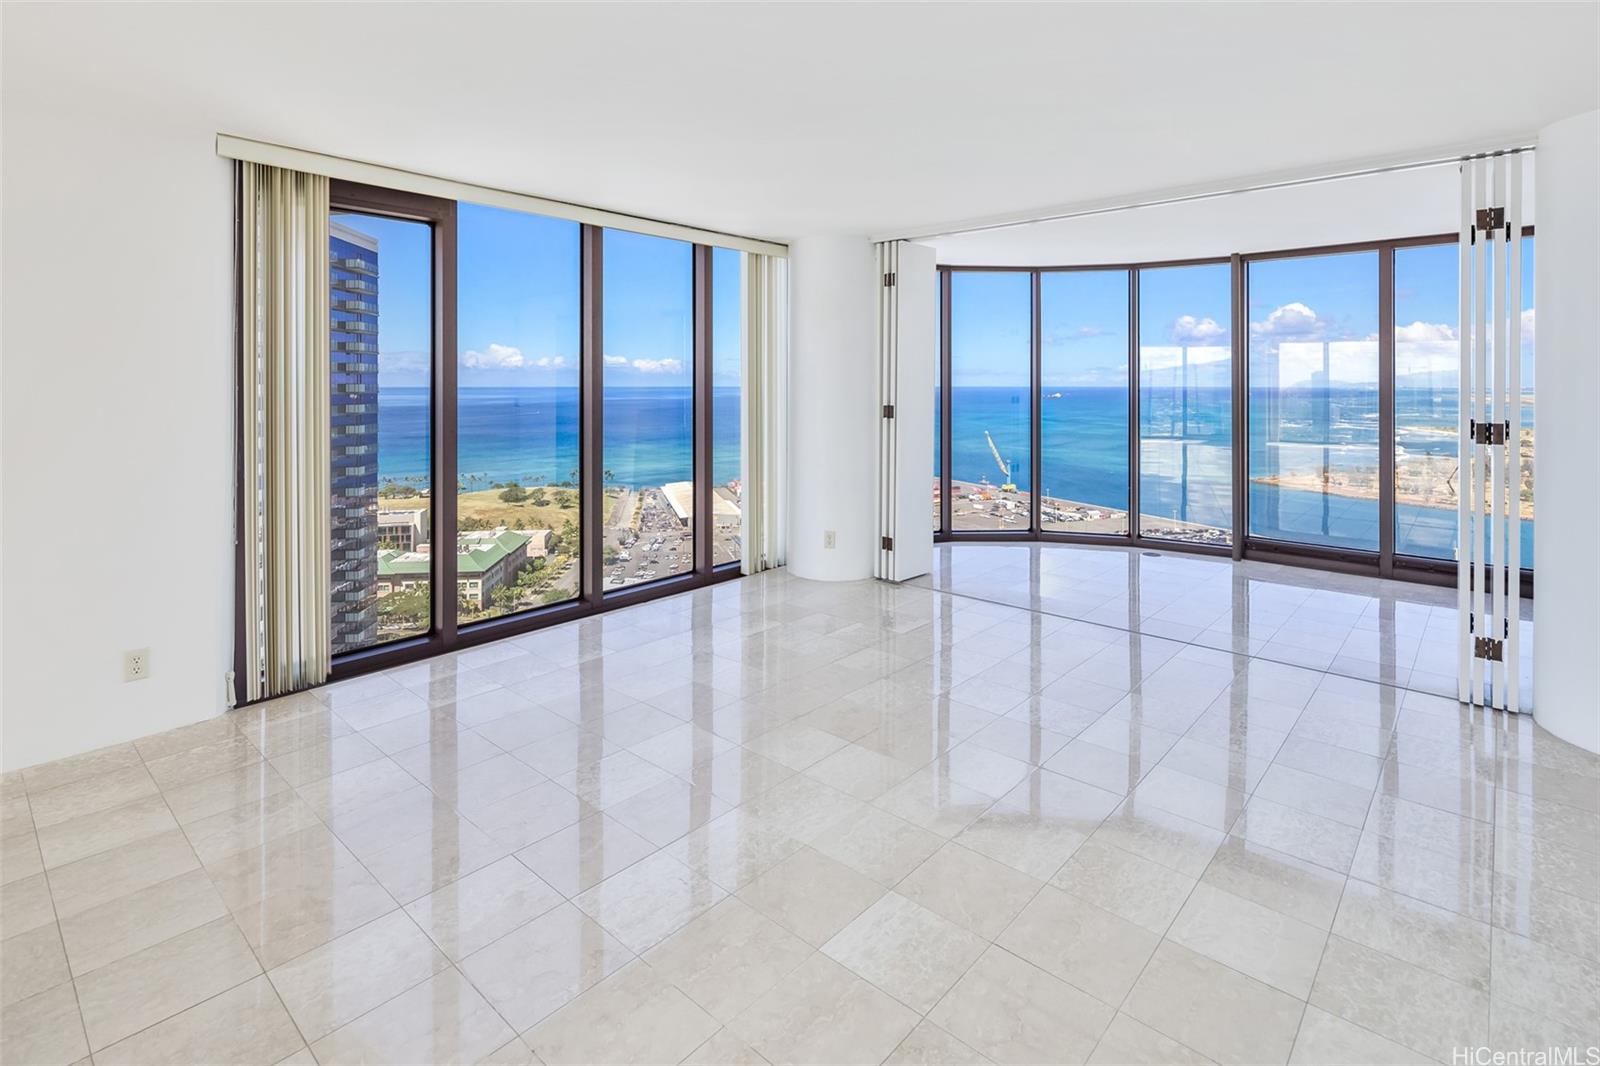 One Waterfront Tower 415 South Street  Unit 3901